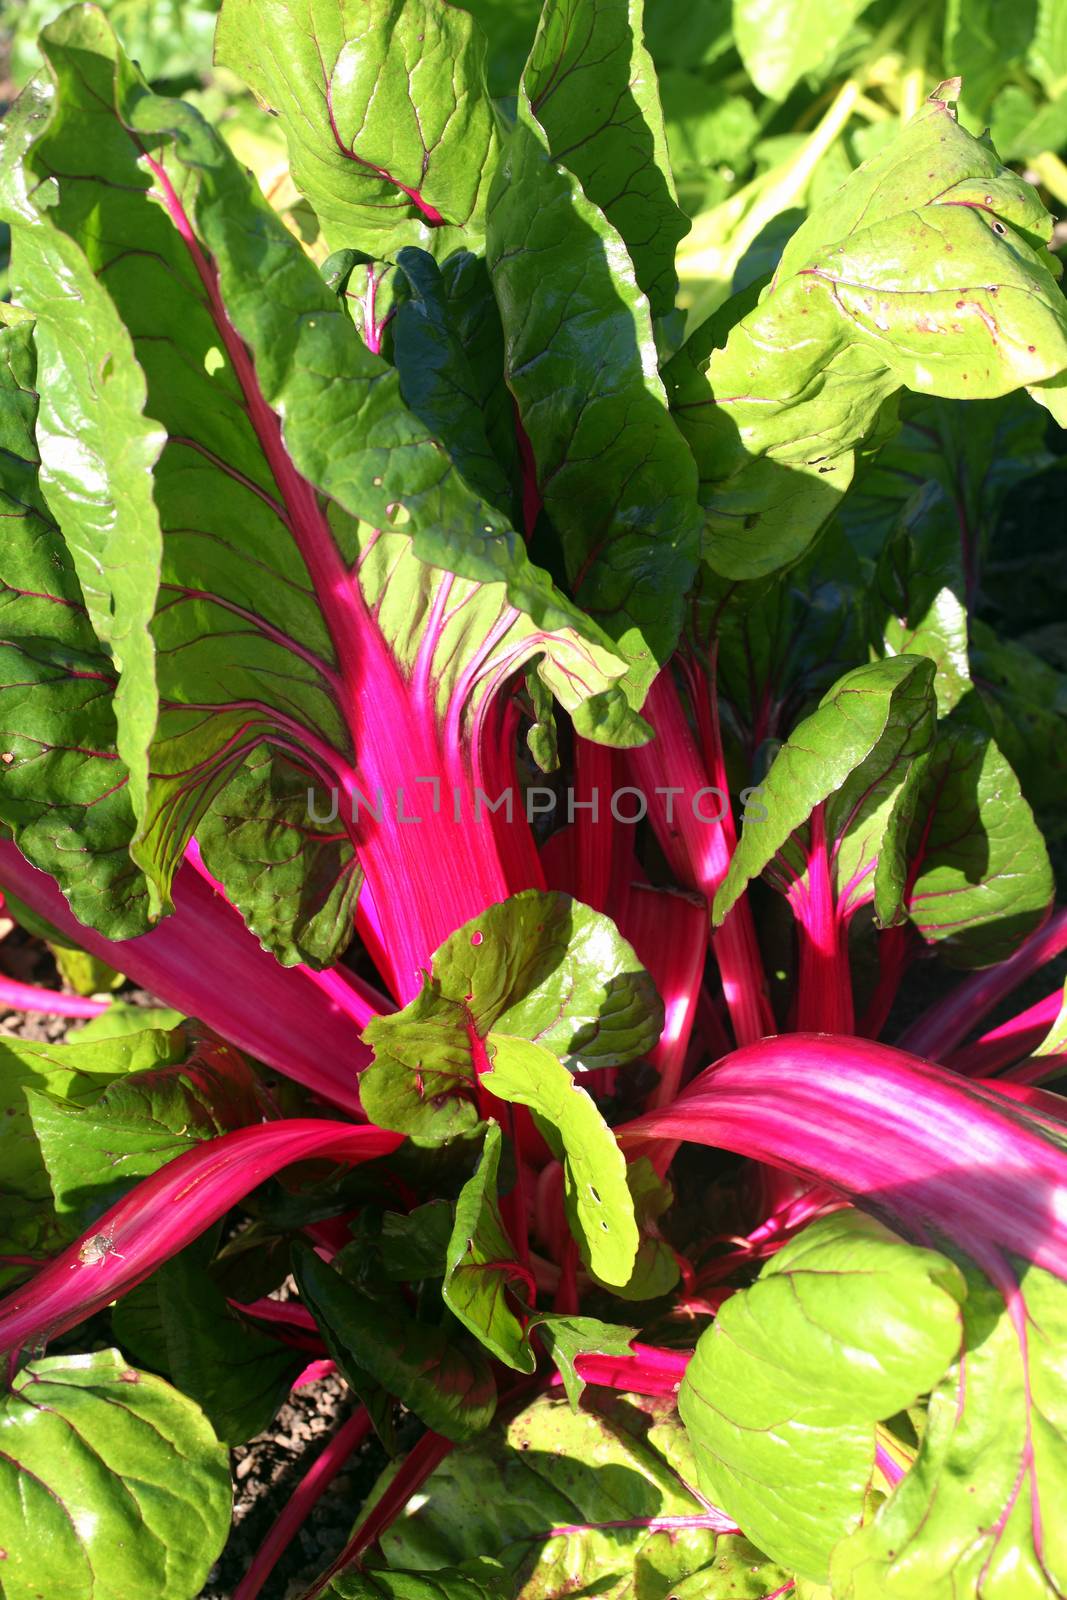 Swiss chard, Beta vulgaris subsp Cicla var flavescens 'Pink Pass by ant